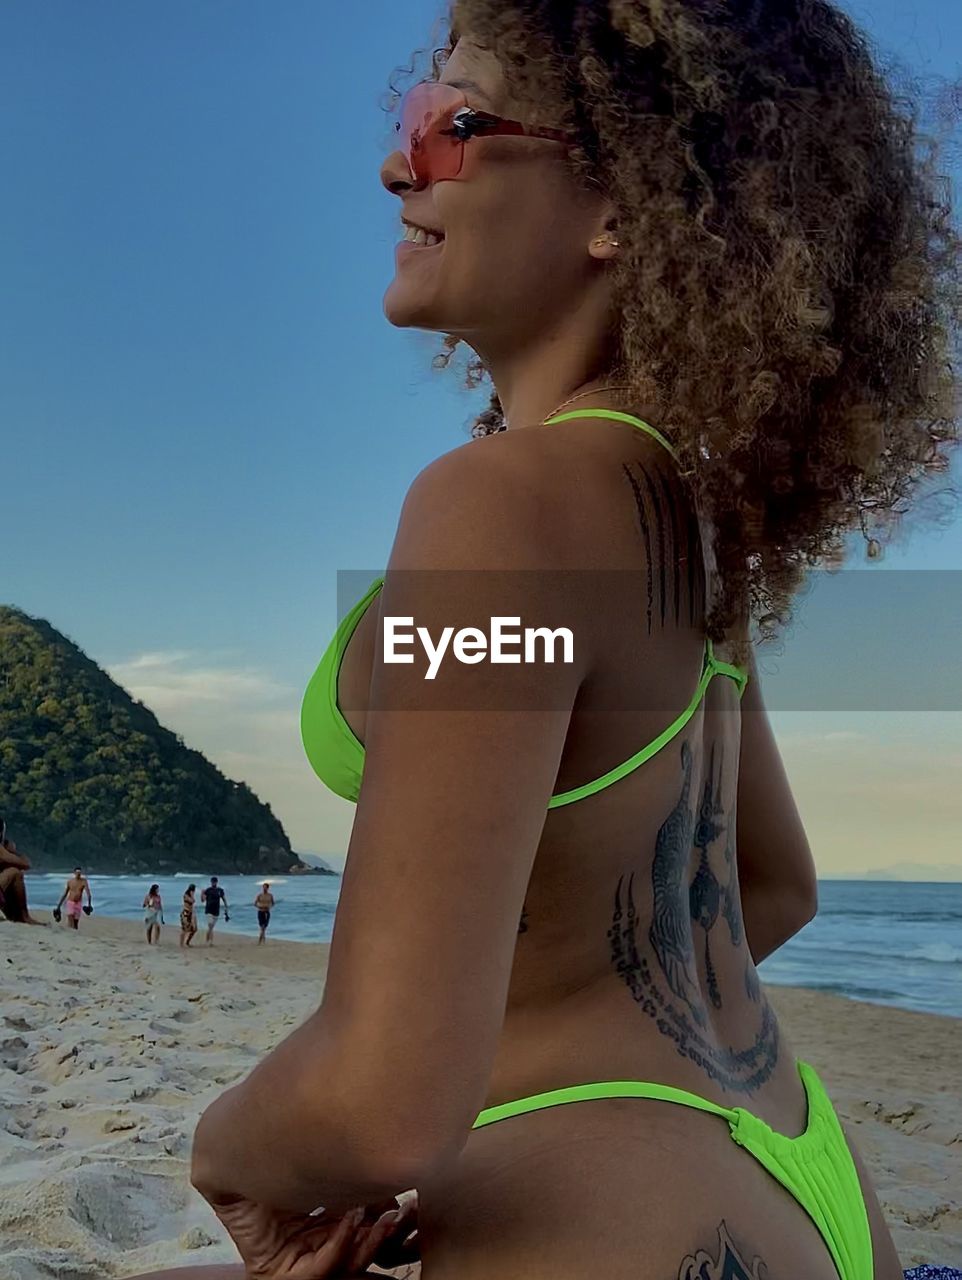 beach, land, adult, water, women, trip, vacation, sun tanning, swimwear, holiday, sea, bikini, summer, clothing, nature, young adult, leisure activity, sky, hairstyle, relaxation, one person, sand, lifestyles, travel, side view, fashion, glasses, smiling, female, curly hair, beauty in nature, day, happiness, sunlight, emotion, human hair, sunglasses, portrait, enjoyment, travel destinations, outdoors, clear sky, blue, looking, person, blond hair, sunbathing, sun, photo shoot, sitting, weekend activities, standing, tropical climate, tourist, long hair, fun, sports, sunny, tranquility, three quarter length, swimsuit top, suntan lotion, waist up